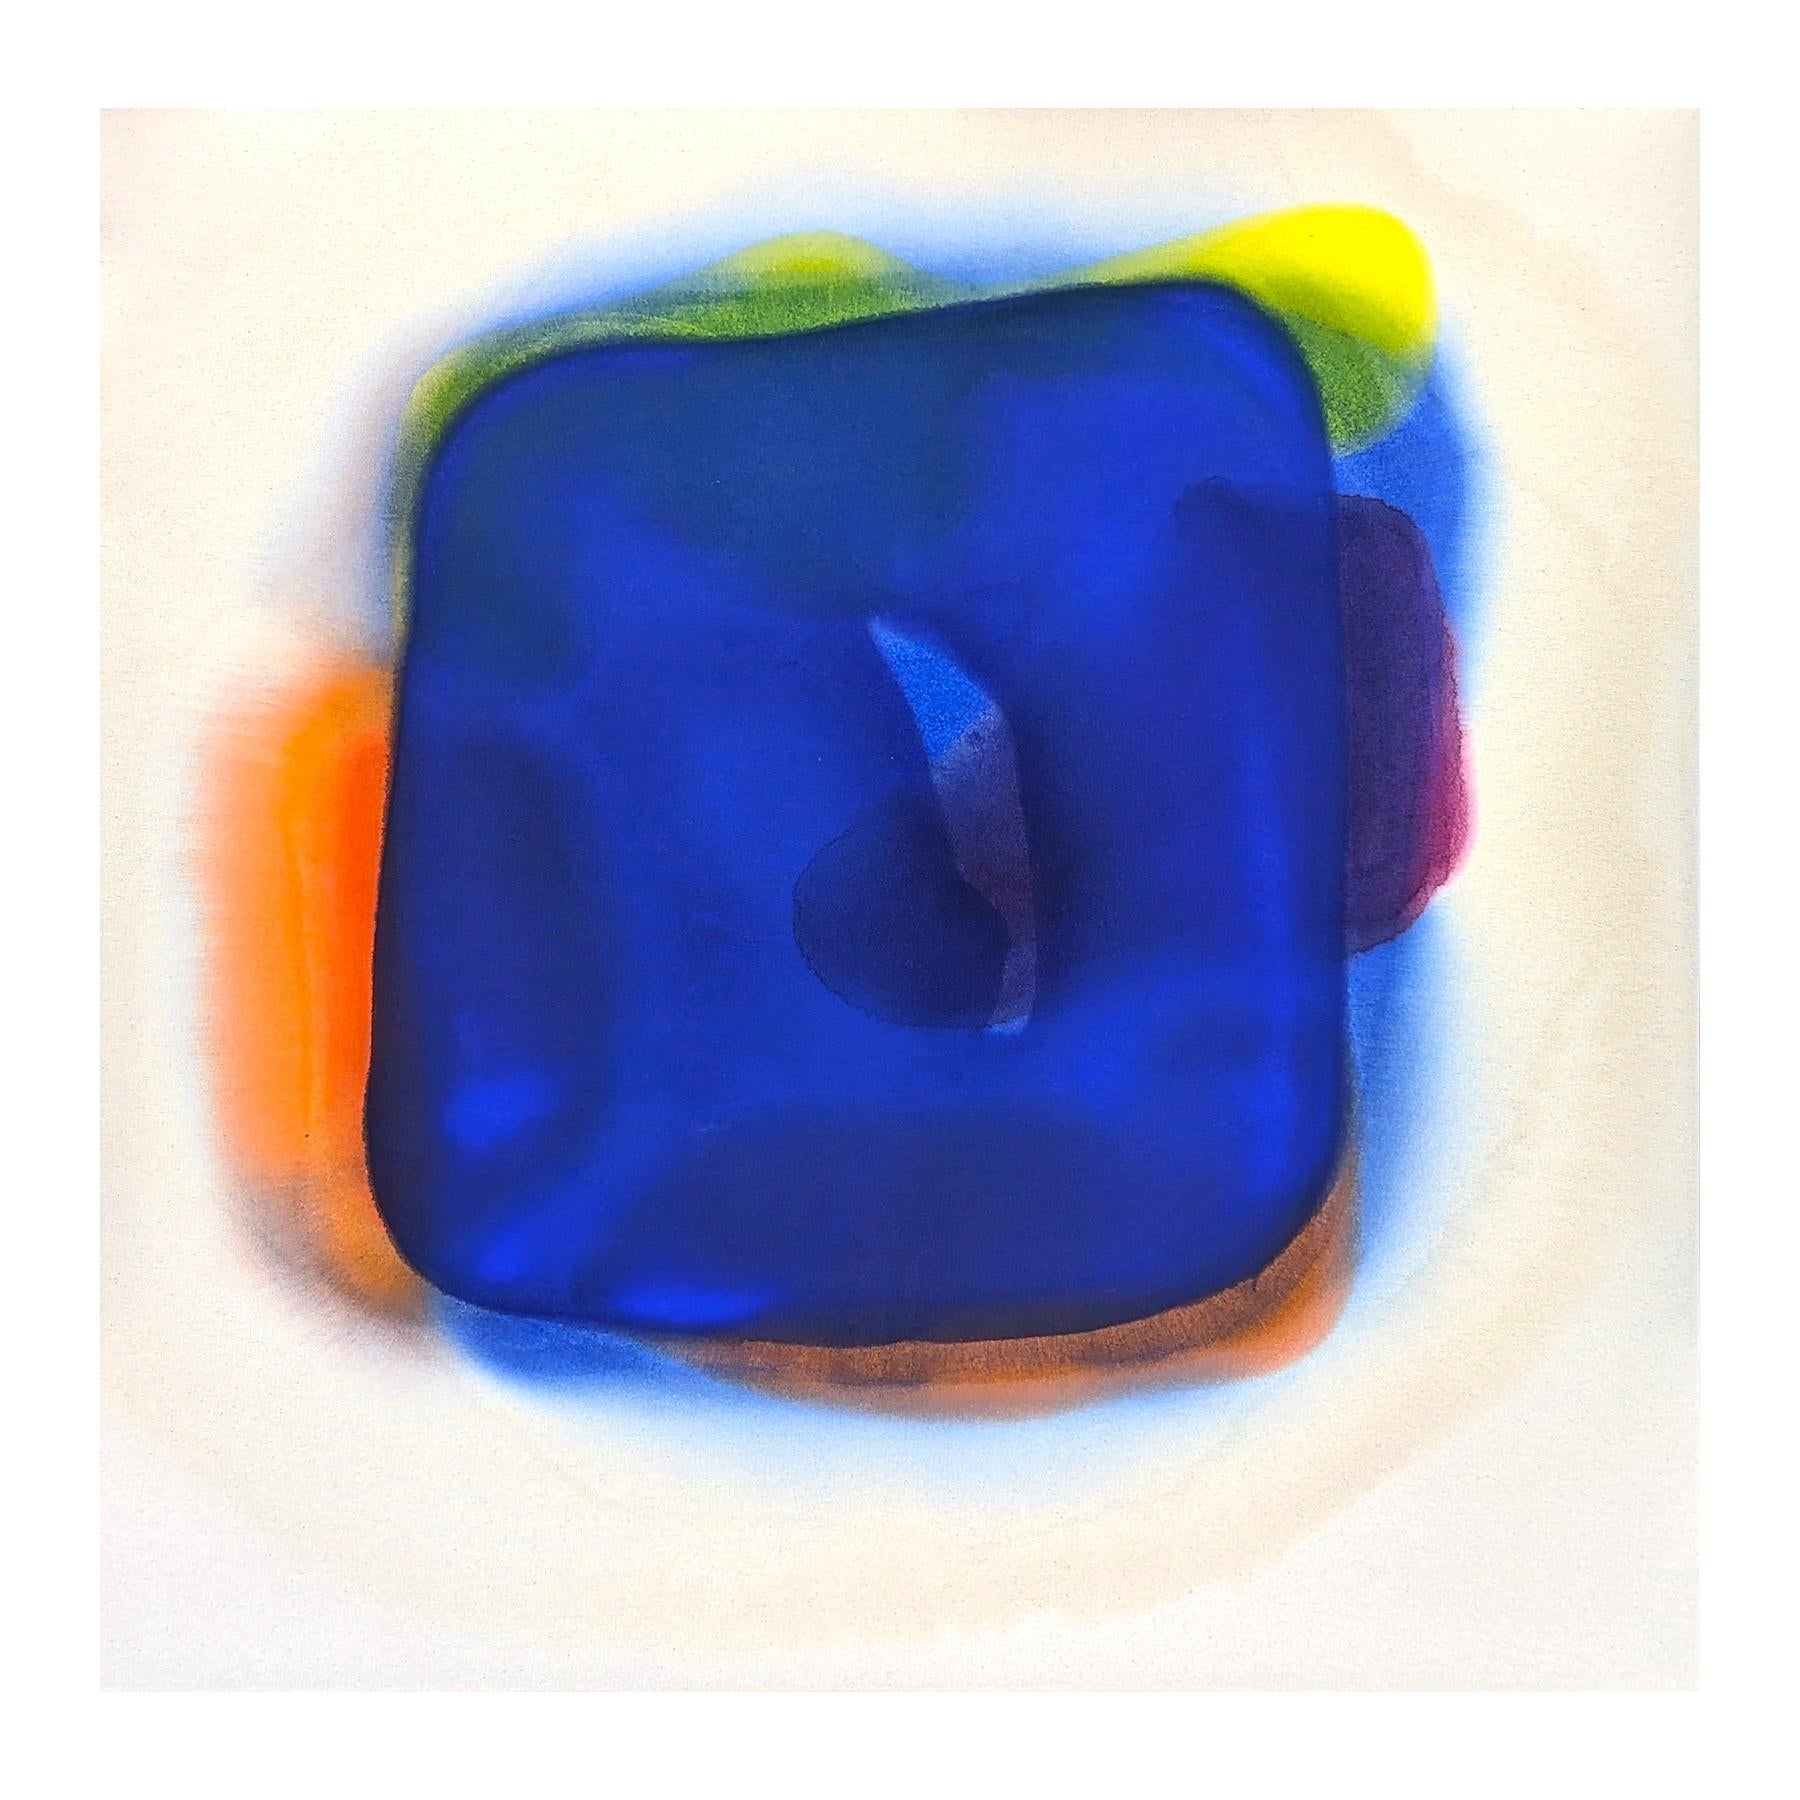 Contemporary abstract painting by Houston-based artist Gary Griffin. The work features a central amorphous shape created with diffused layers of blue, pink, yellow, and orange paint against an off-white background. Signed, titled, and dated on the